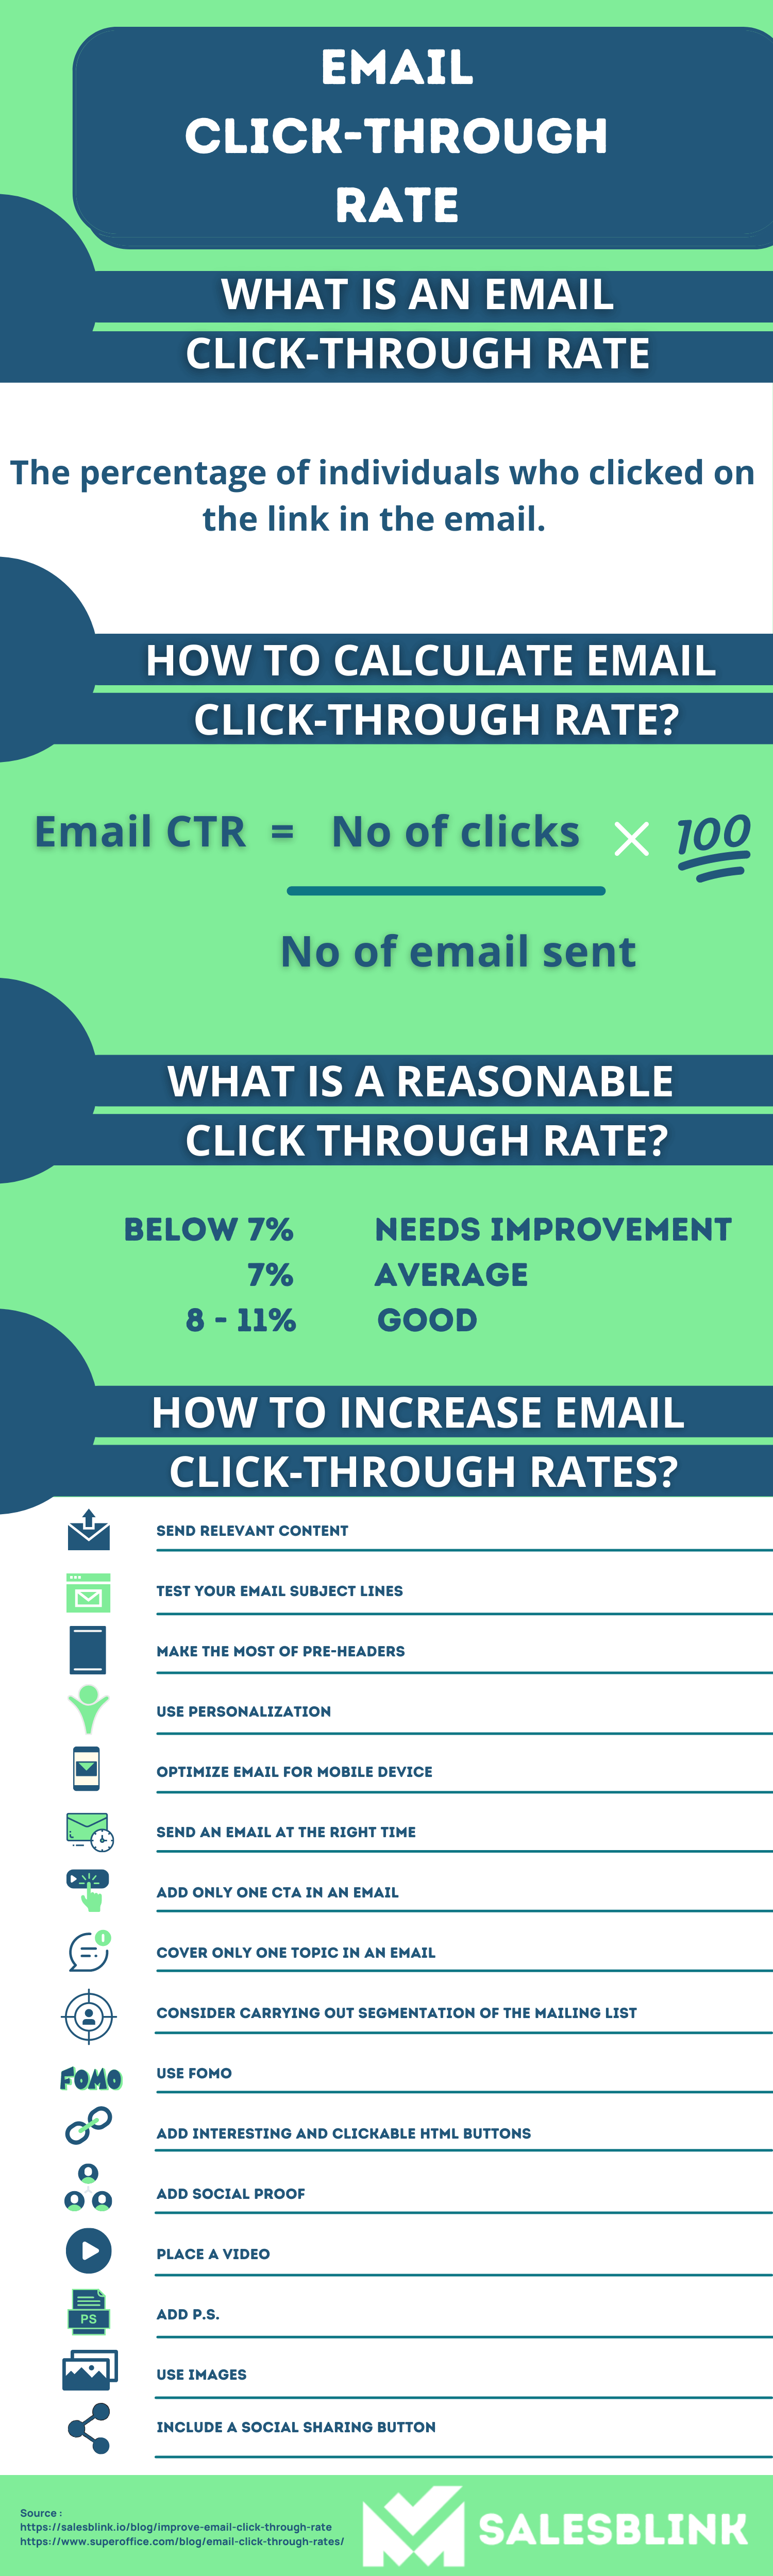 Email Click-Through Rate